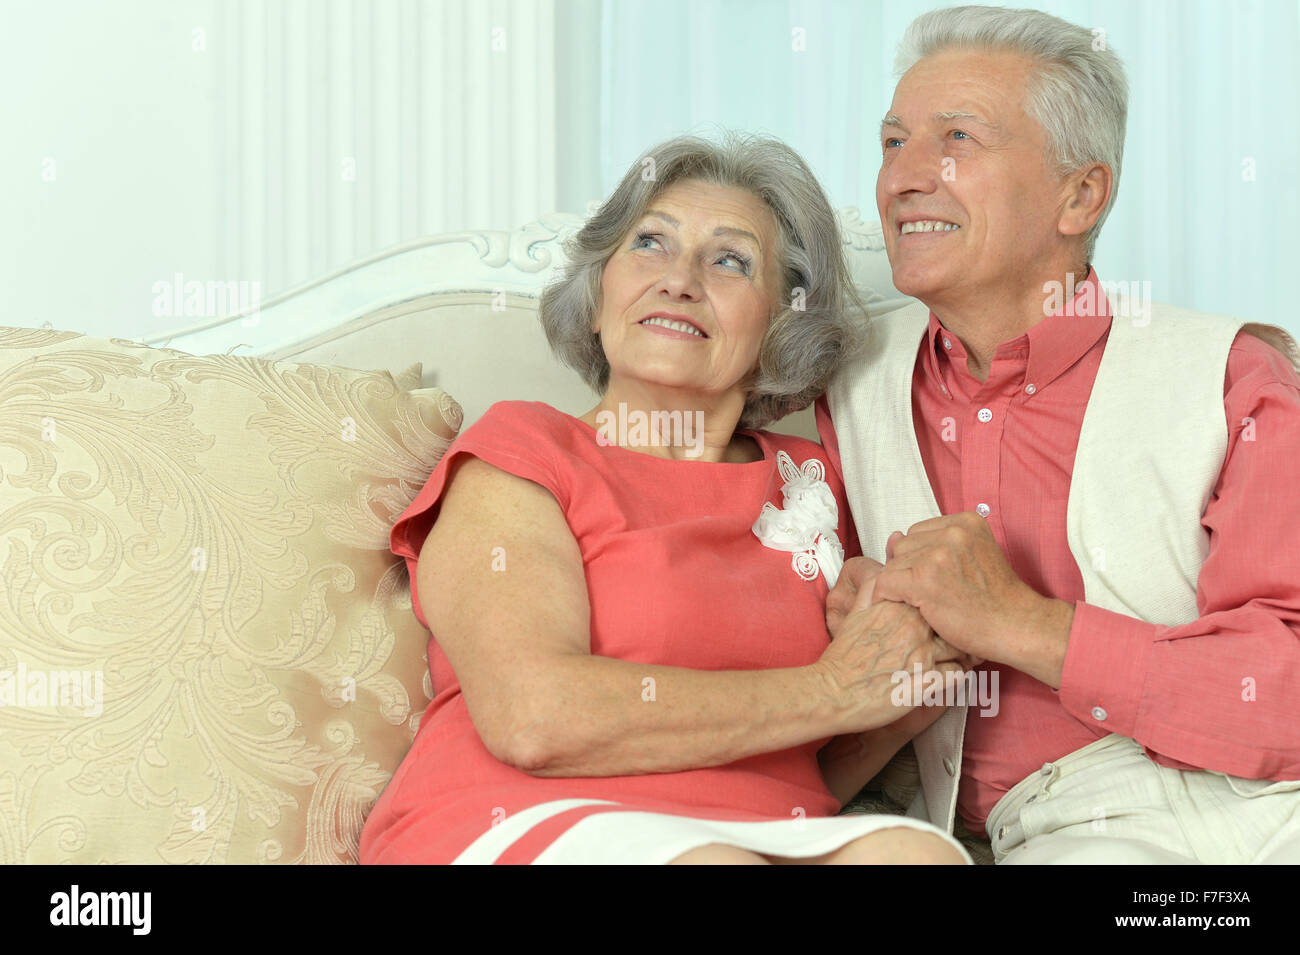 Elderly people sitting on couch Stock Photo